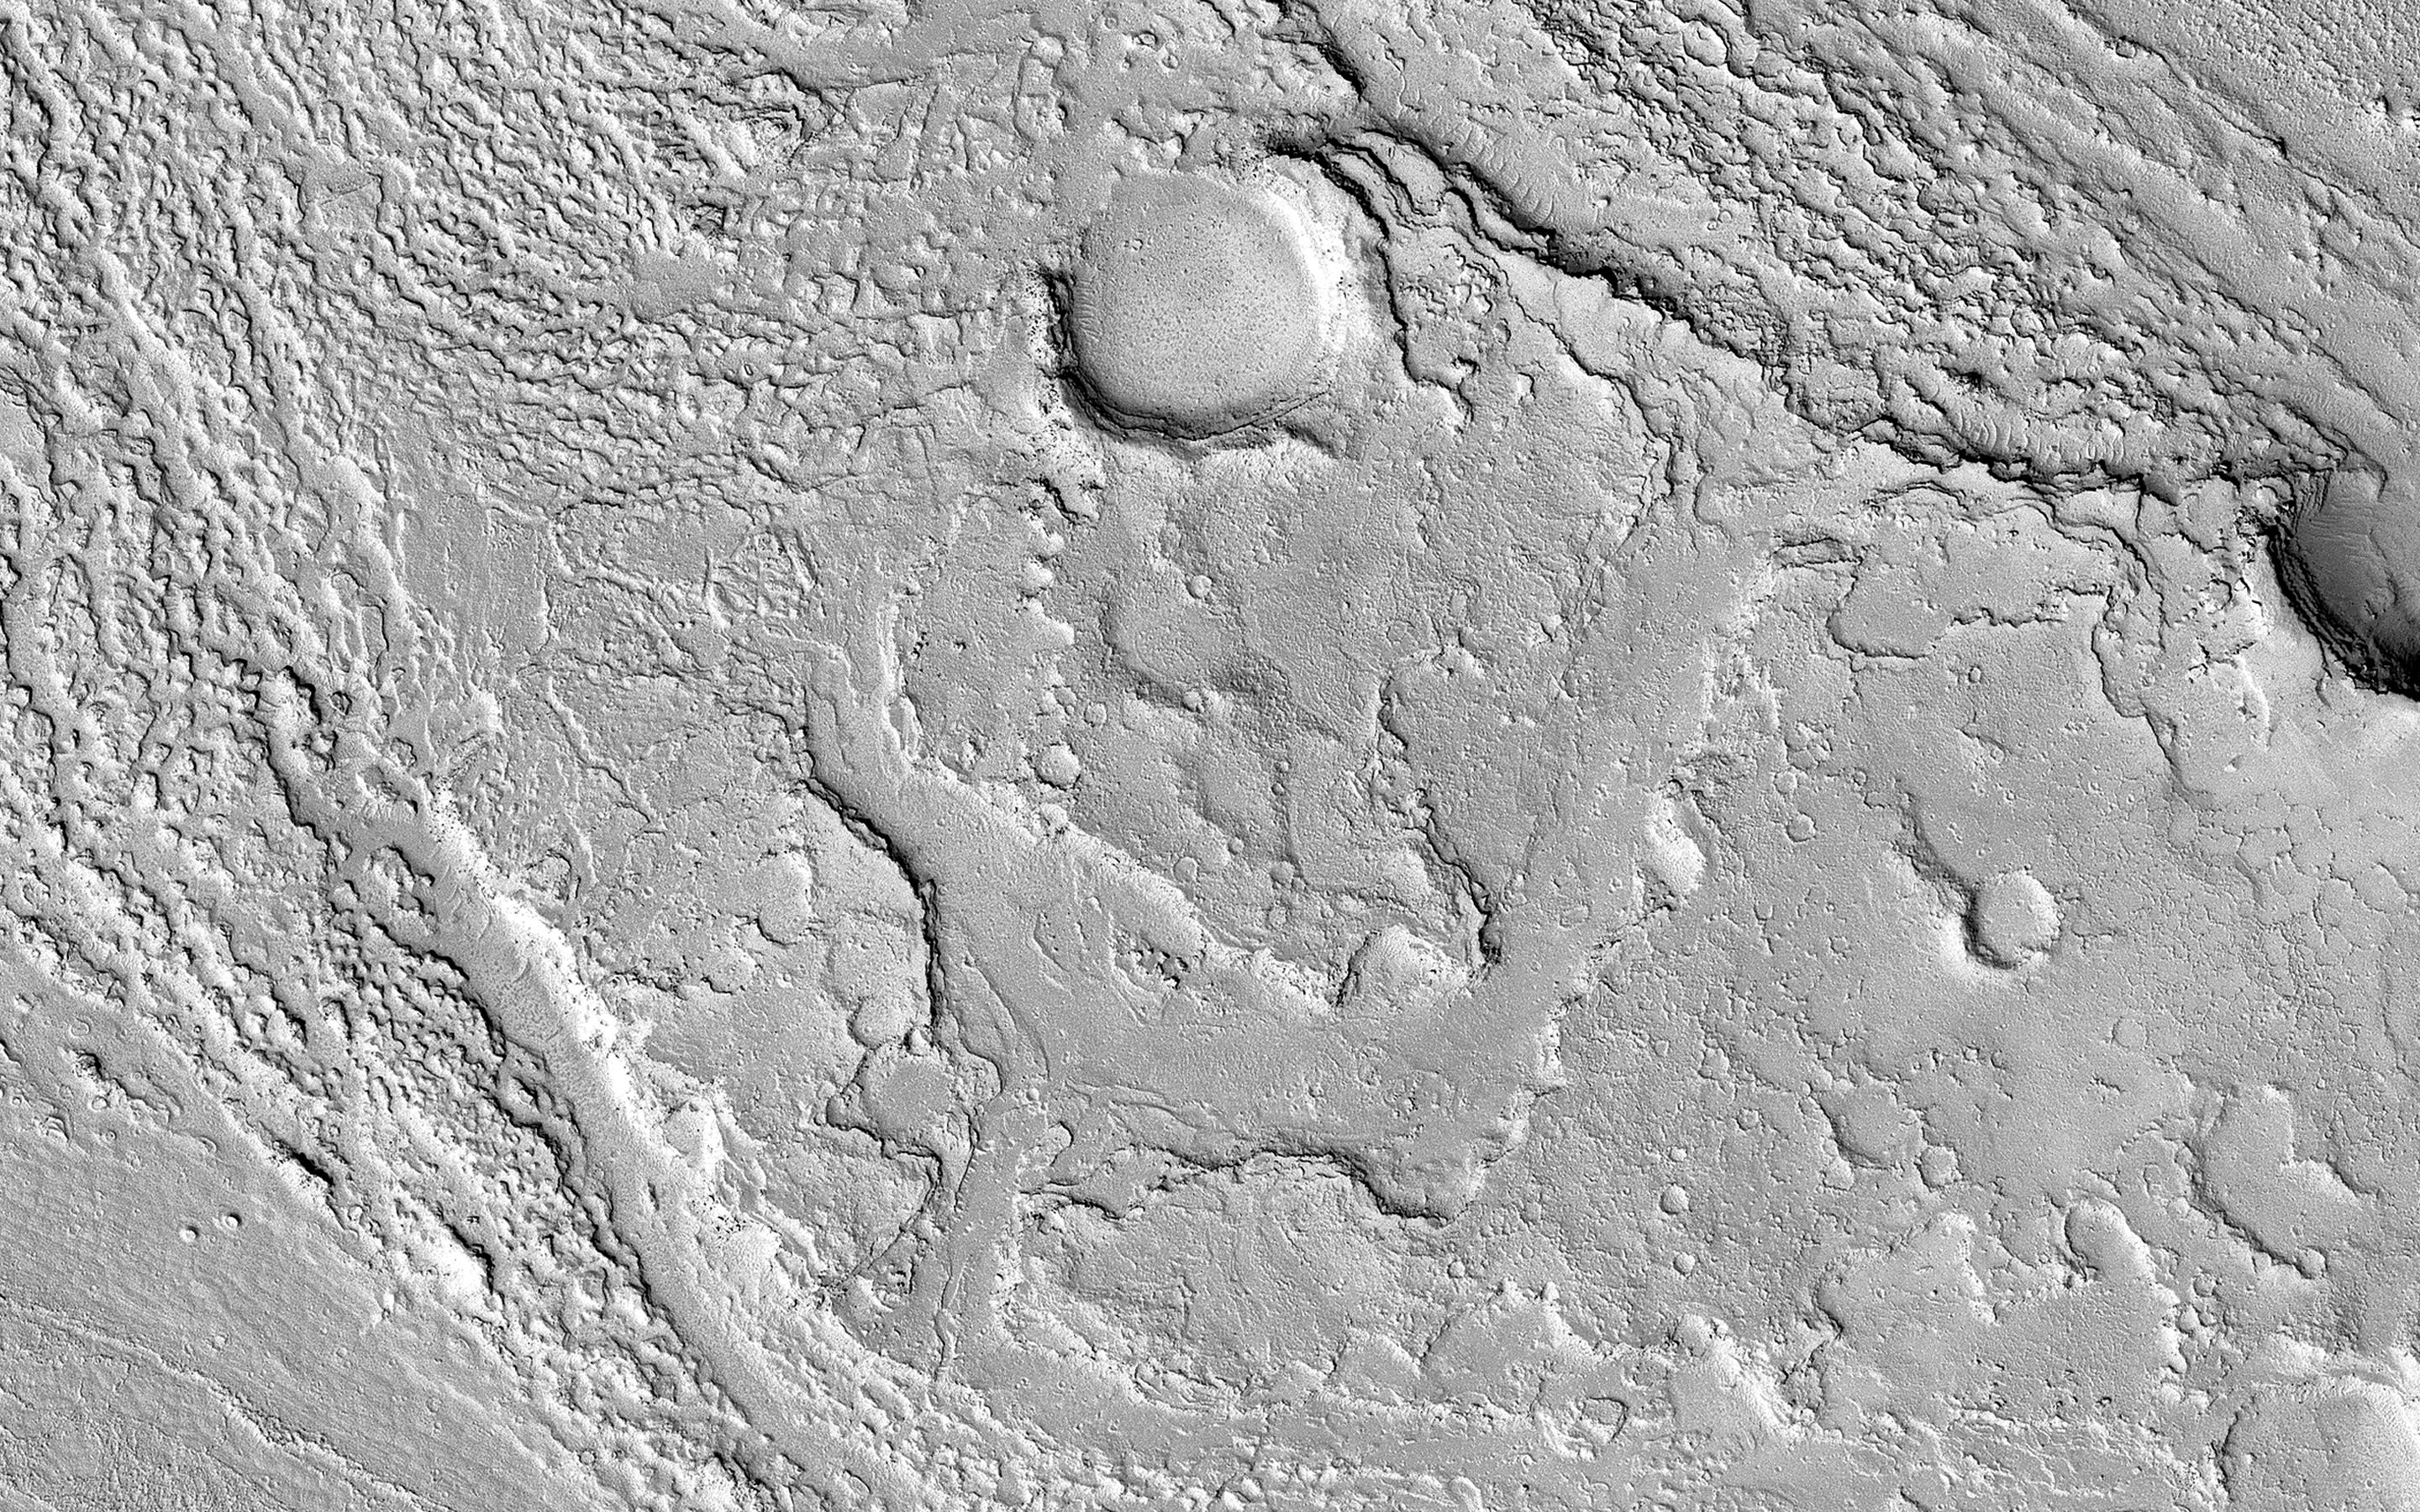 This image acquired on December 9, 2018 by NASAs Mars Reconnaissance Orbiter, shows Athabasca Valles with lava flows originating from Elysium Mons to the northwest.